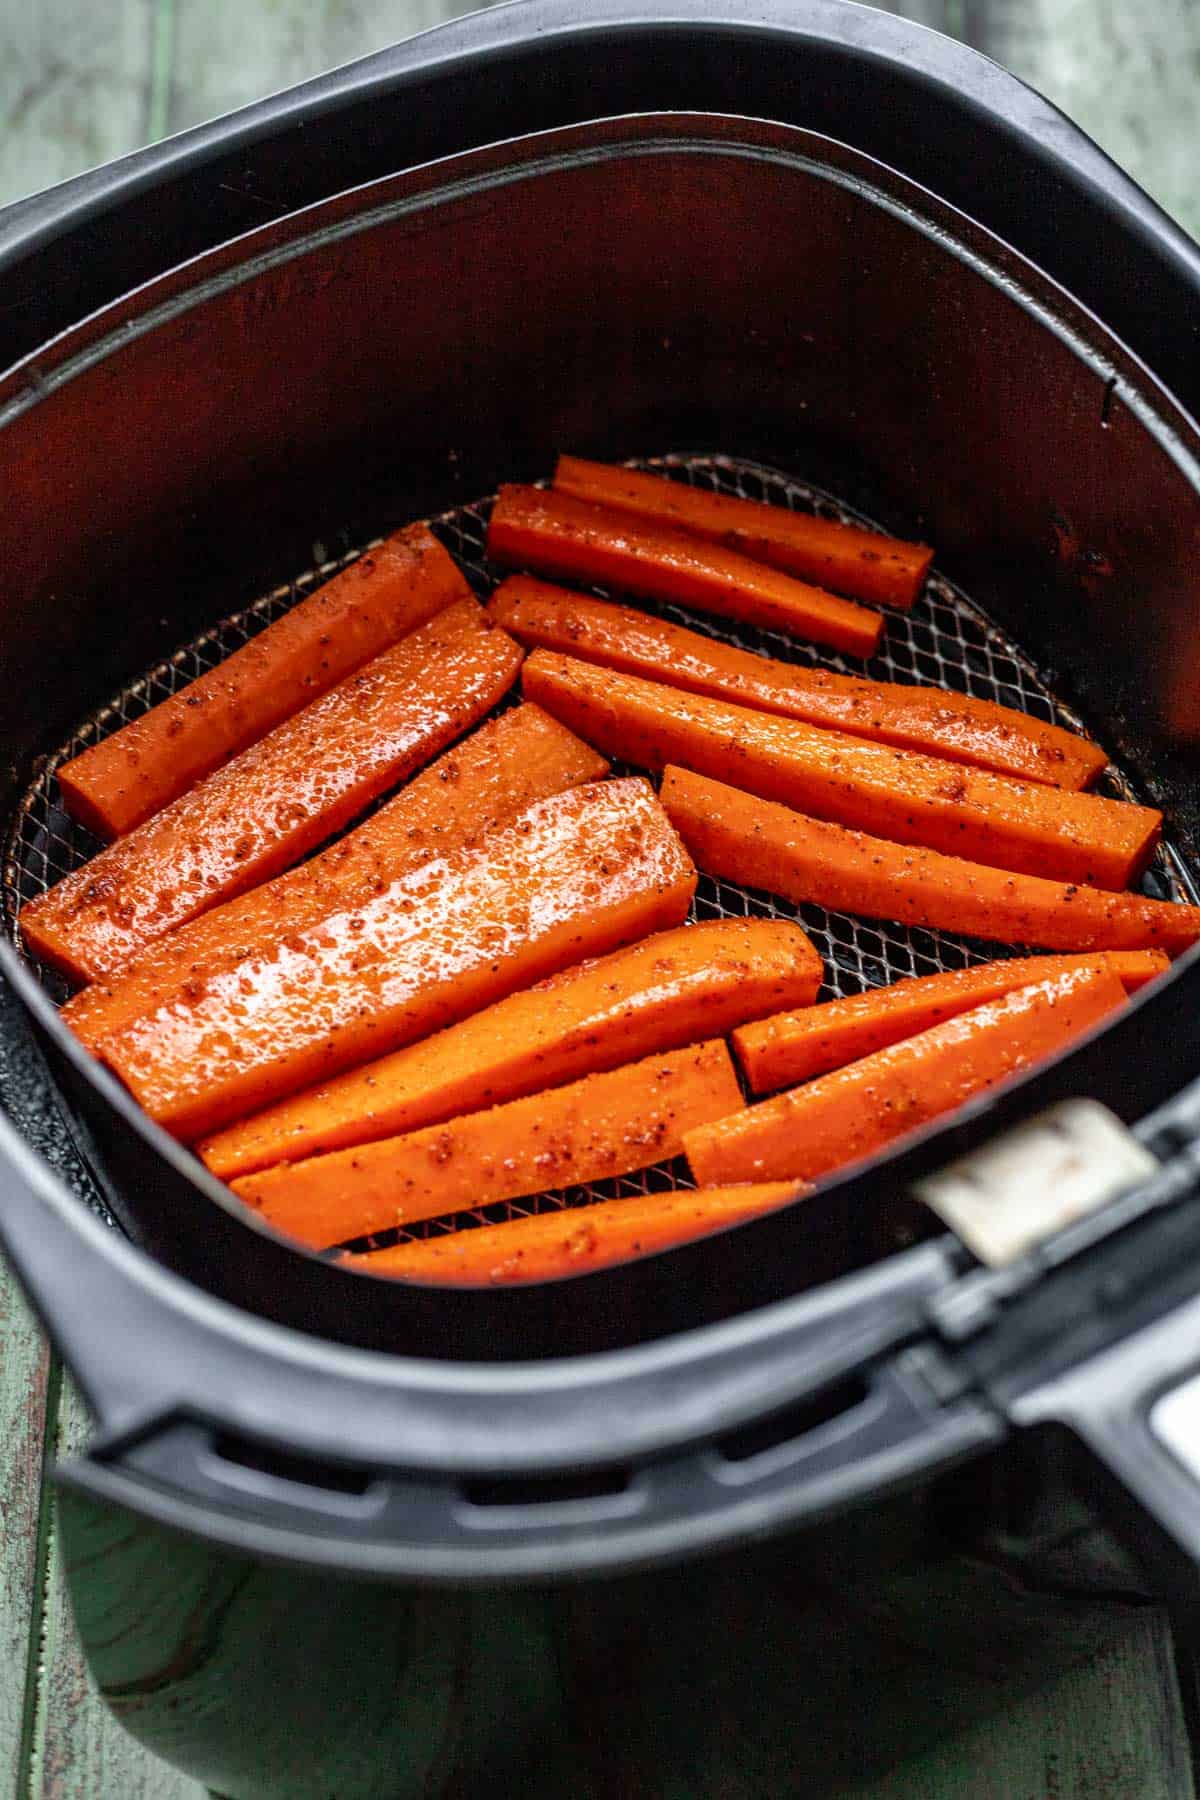 Raw carrots placed in an air fryer basket.